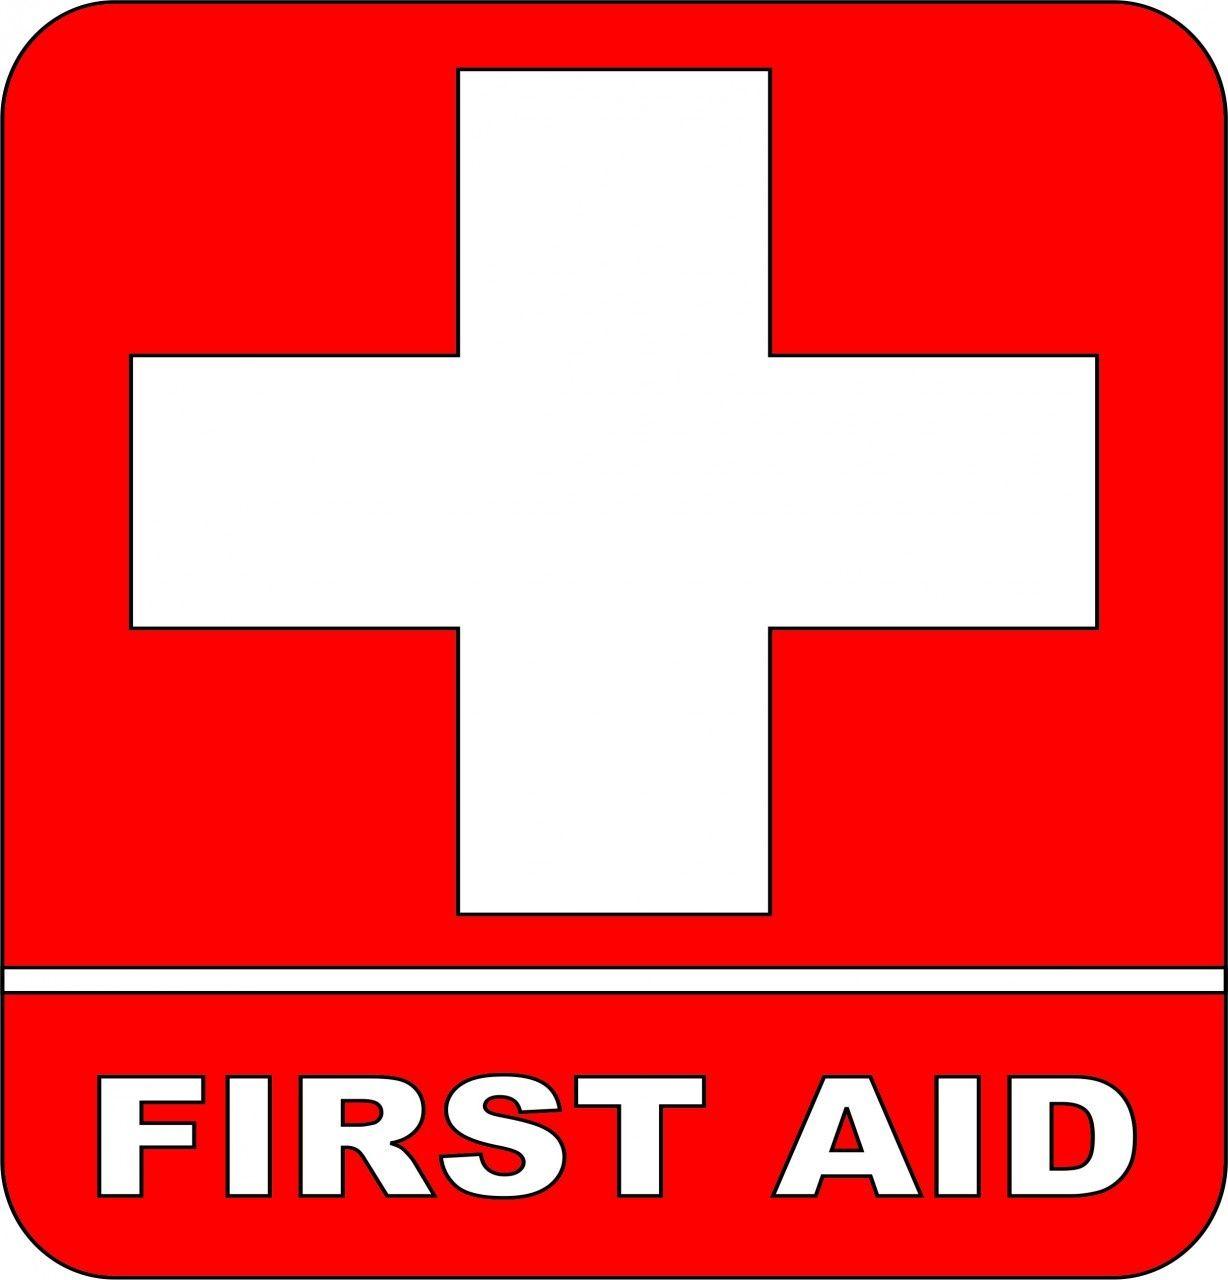 First Aid Logo - First-aid logo | Tupper Lake Goff-Nelson Memorial Library